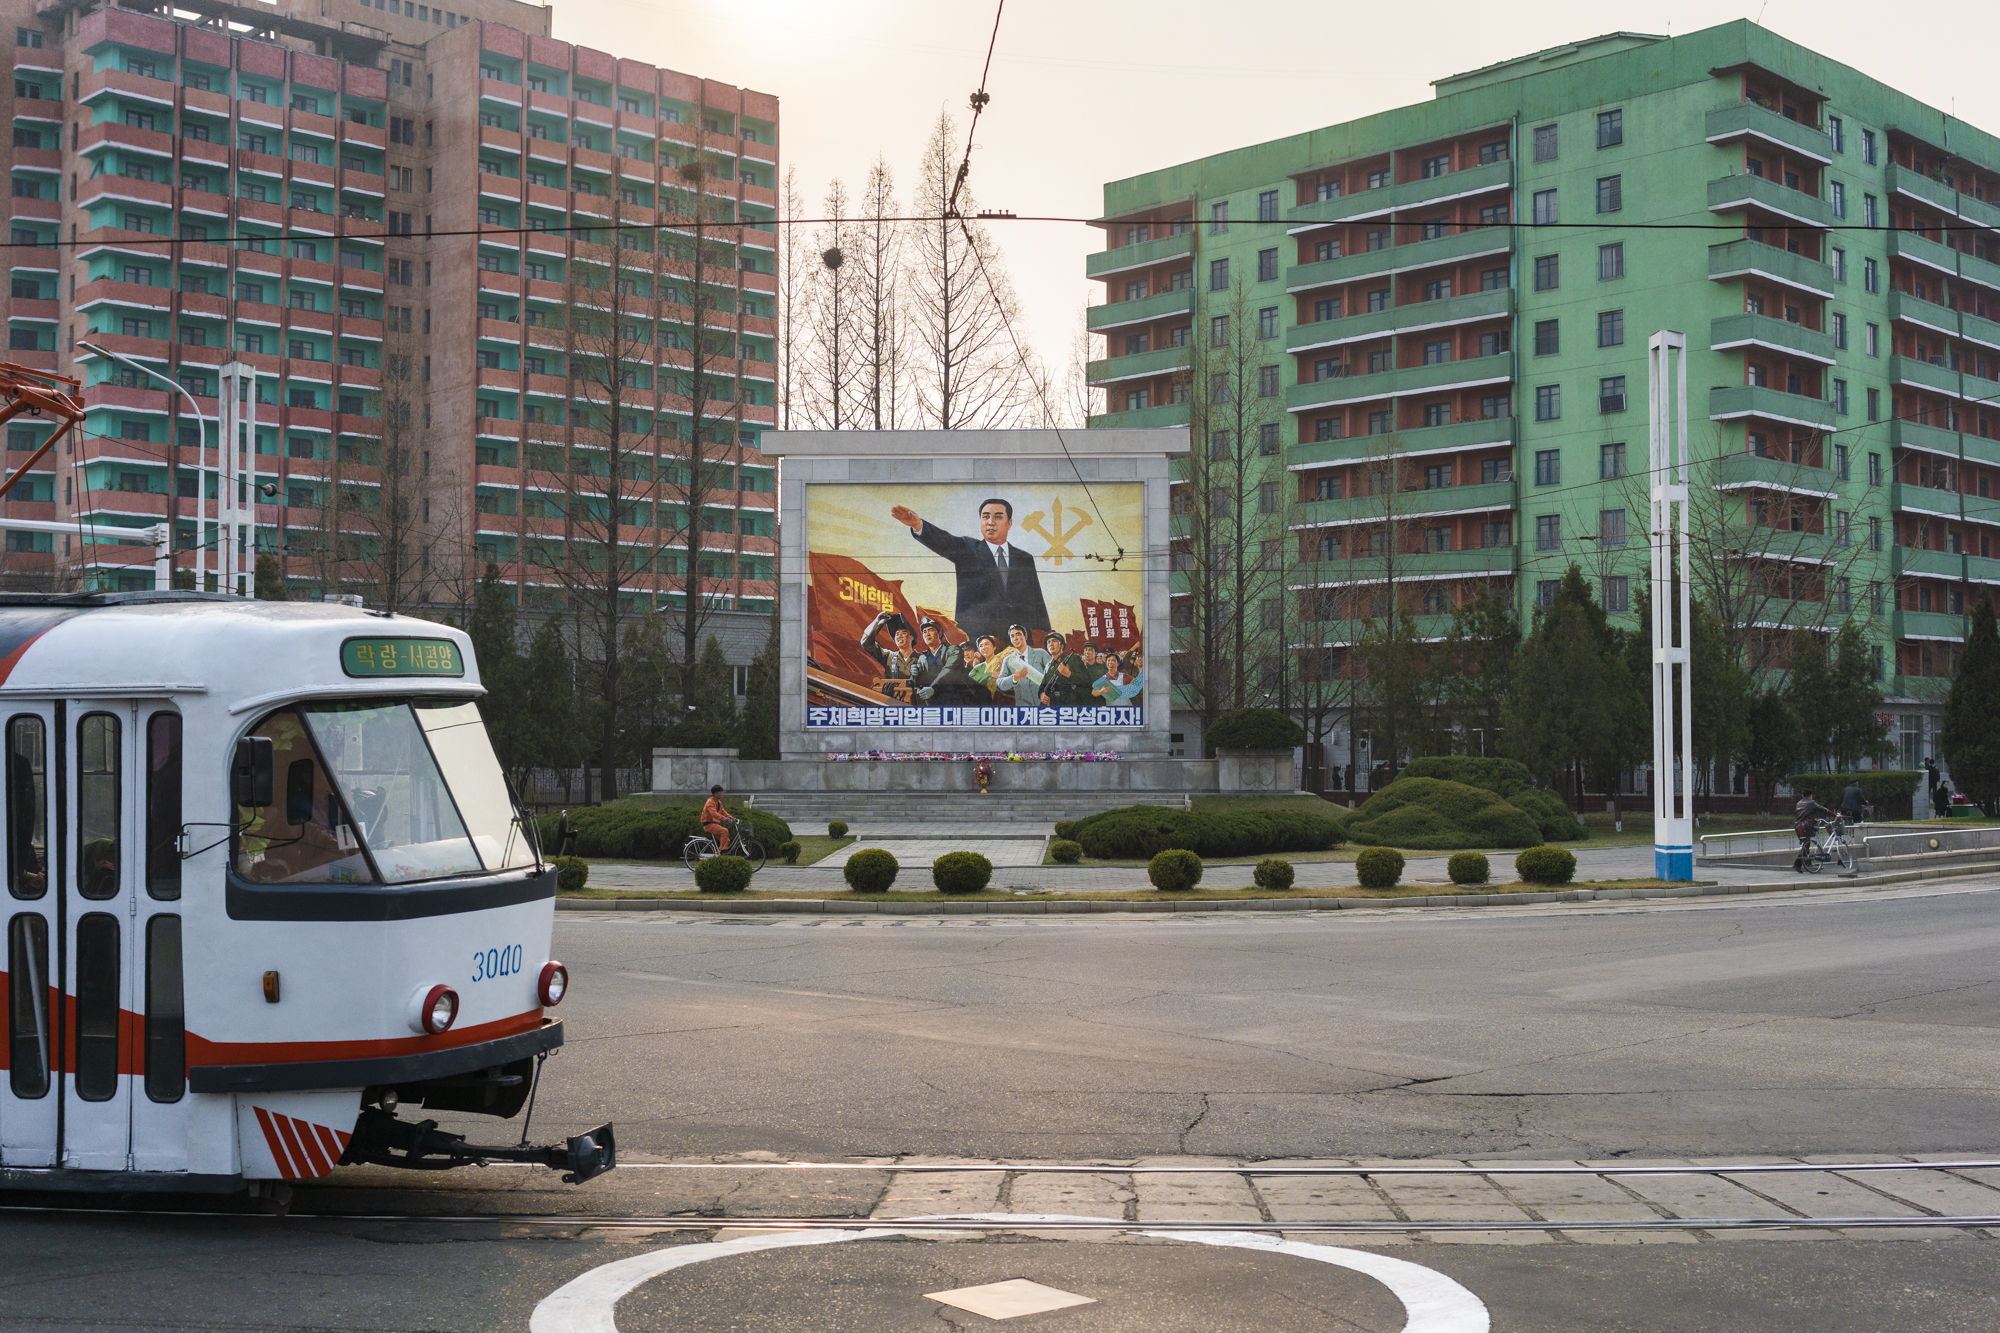  A propaganda mural depicting the Great Leader Kim Il Sung leading the Nation.  Most of the North Korean propaganda disseminates  Juche , which means “self-reliance,” the North Korean ideology of independence promoted by North Korean founder Kim Il S